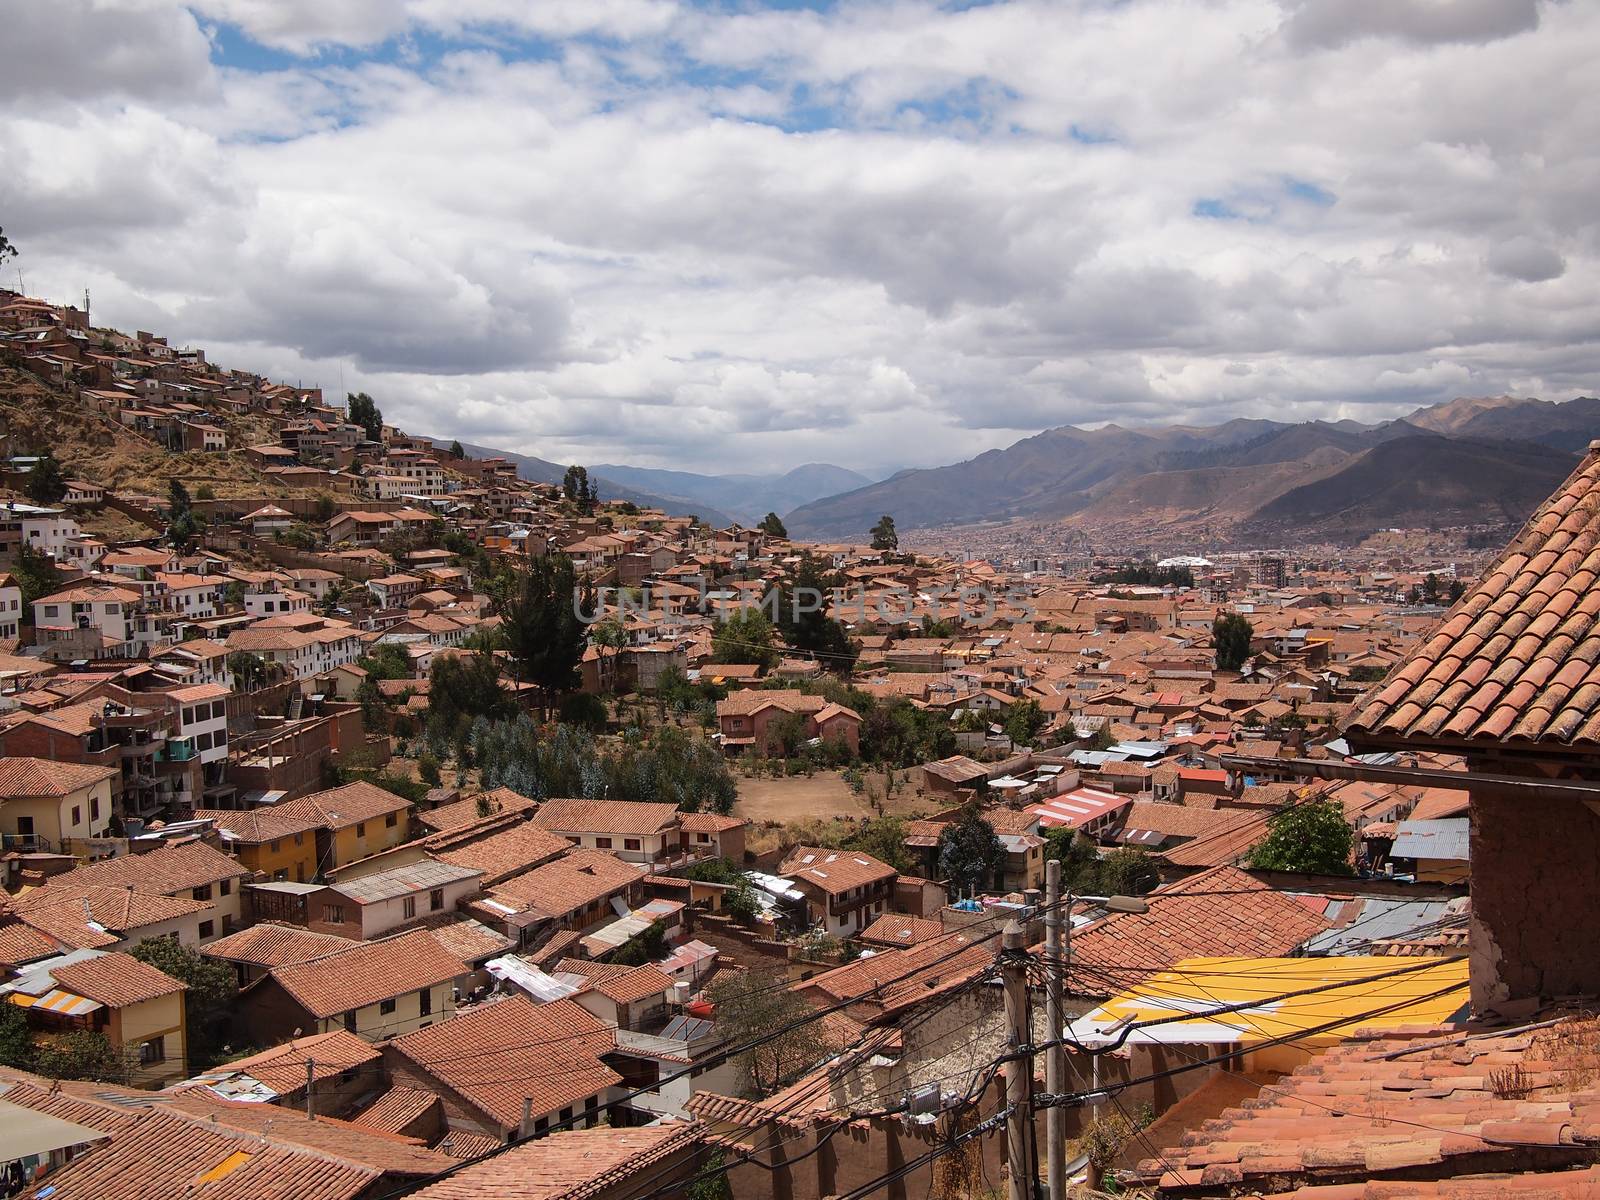 The roofs of Cusco by pljvv